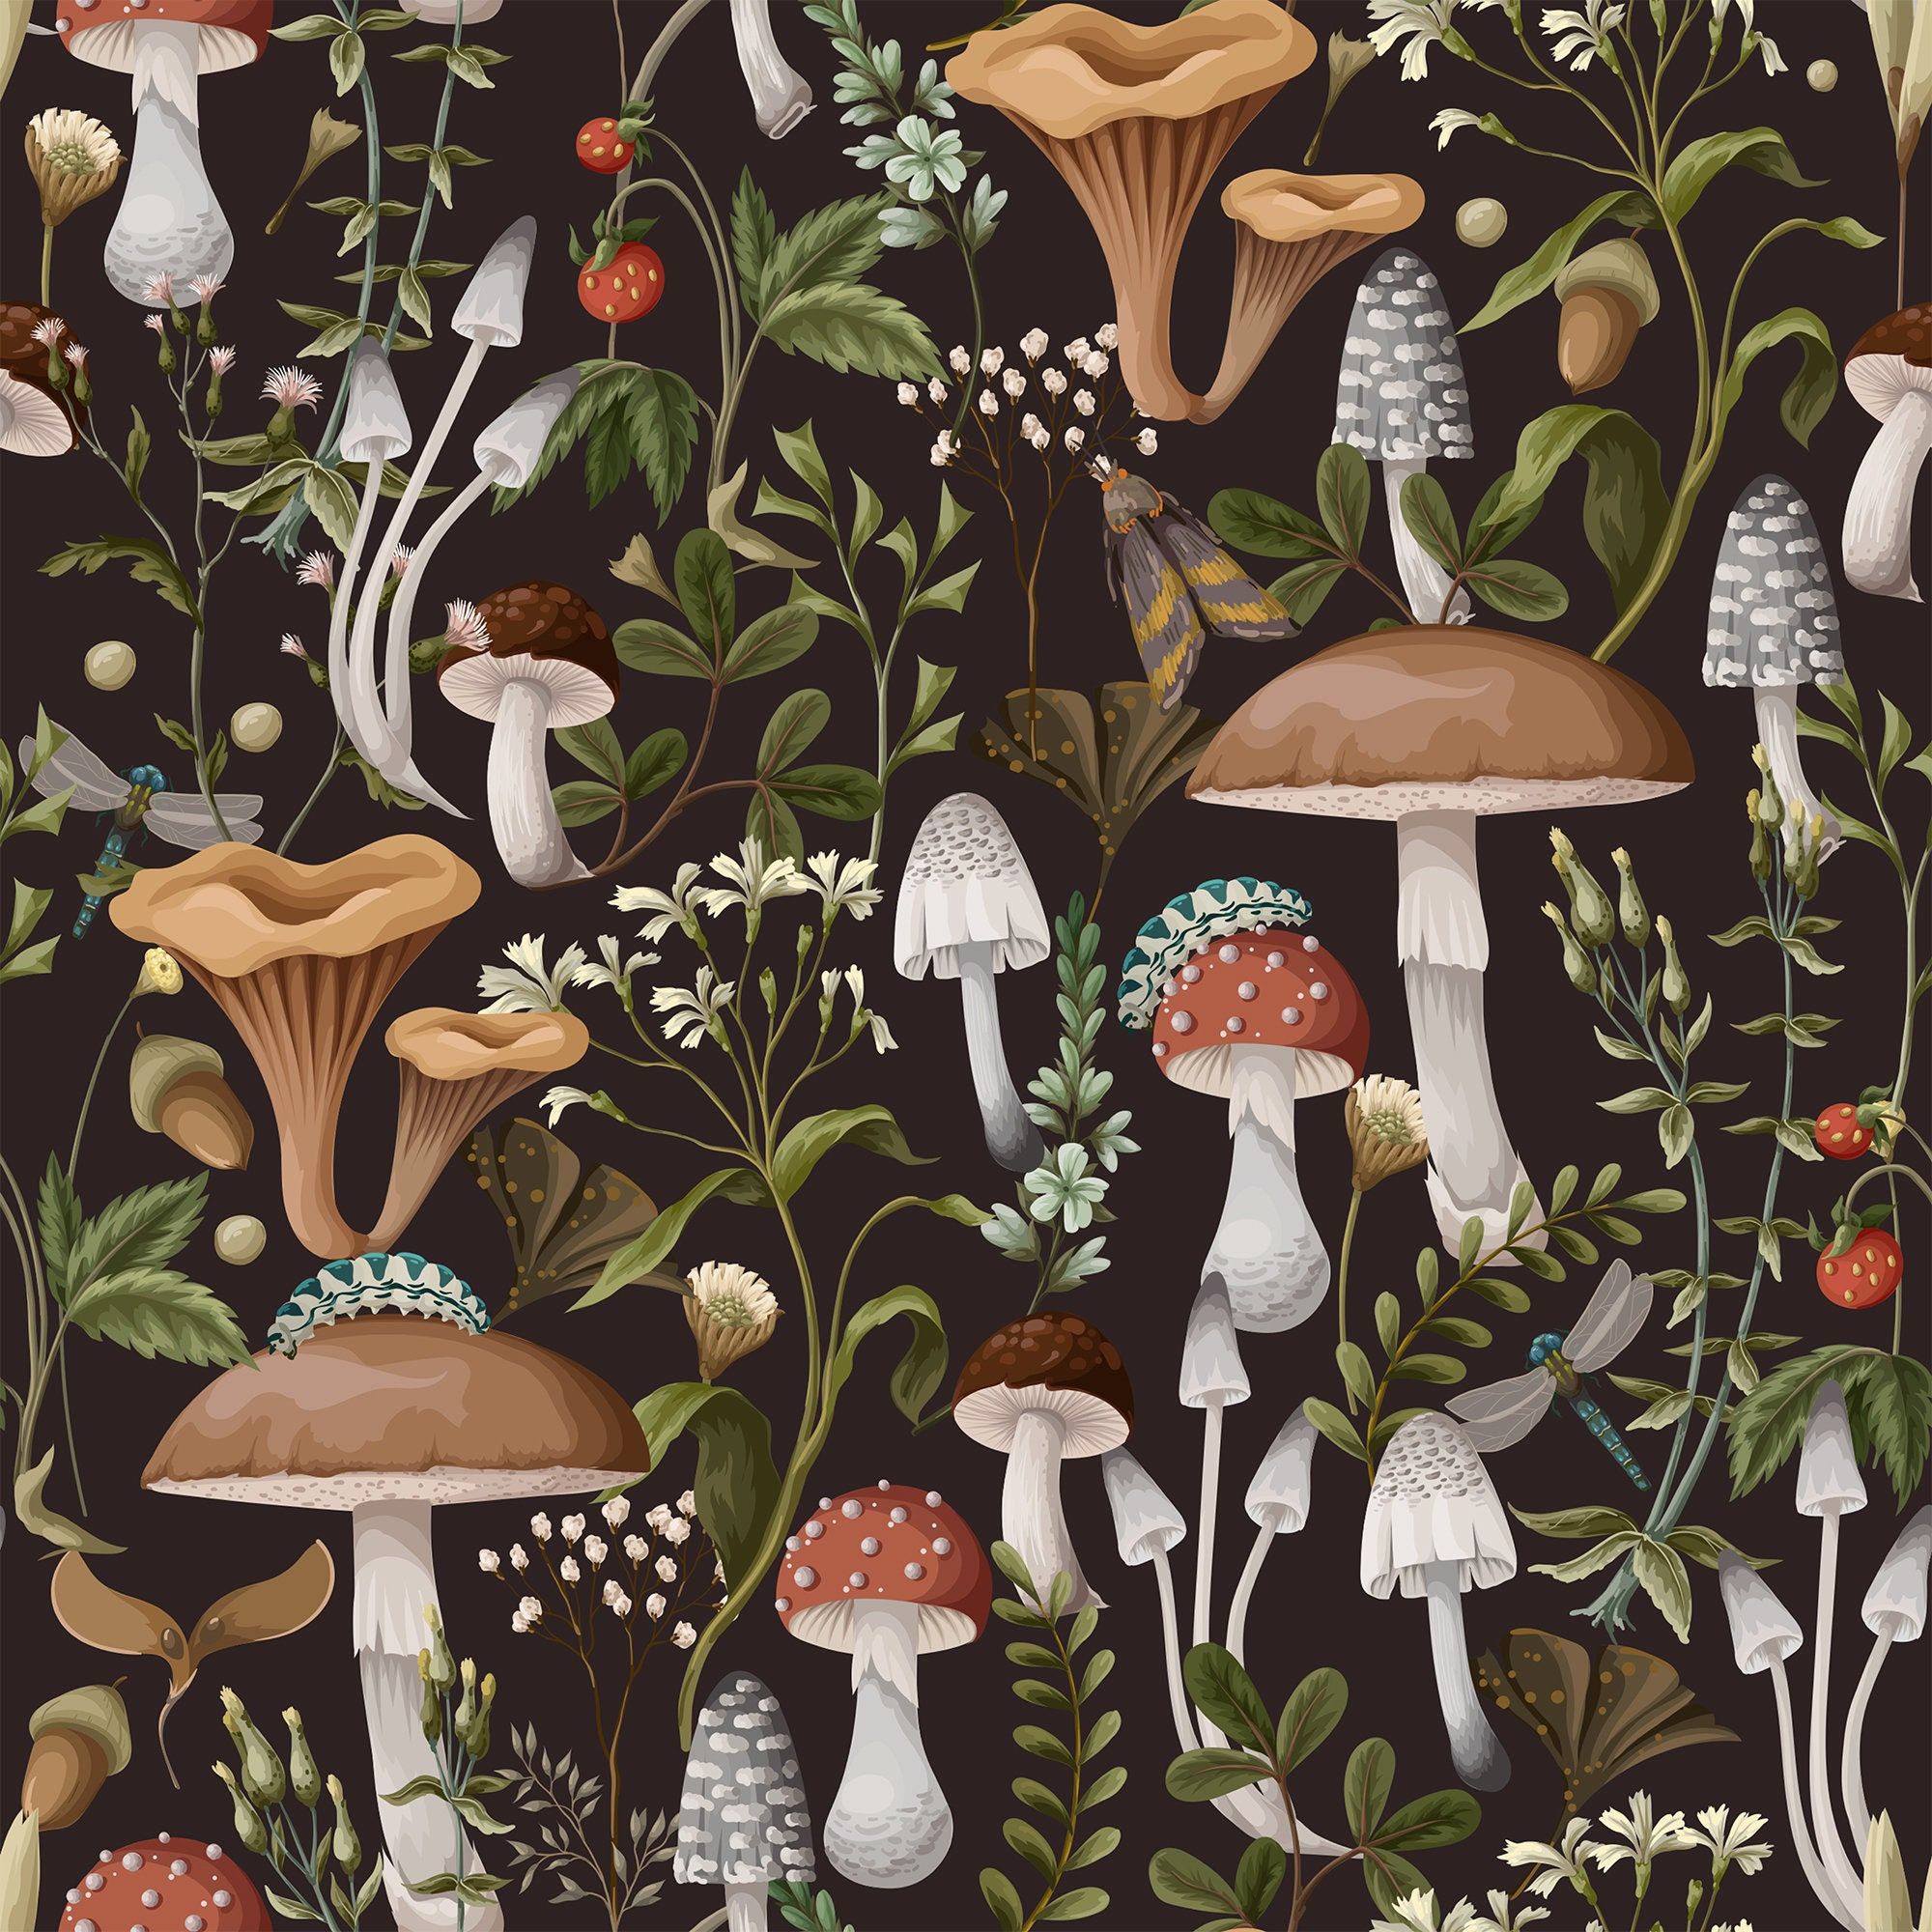 A black background with a pattern of mushrooms, leaves, and berries. - Botanical